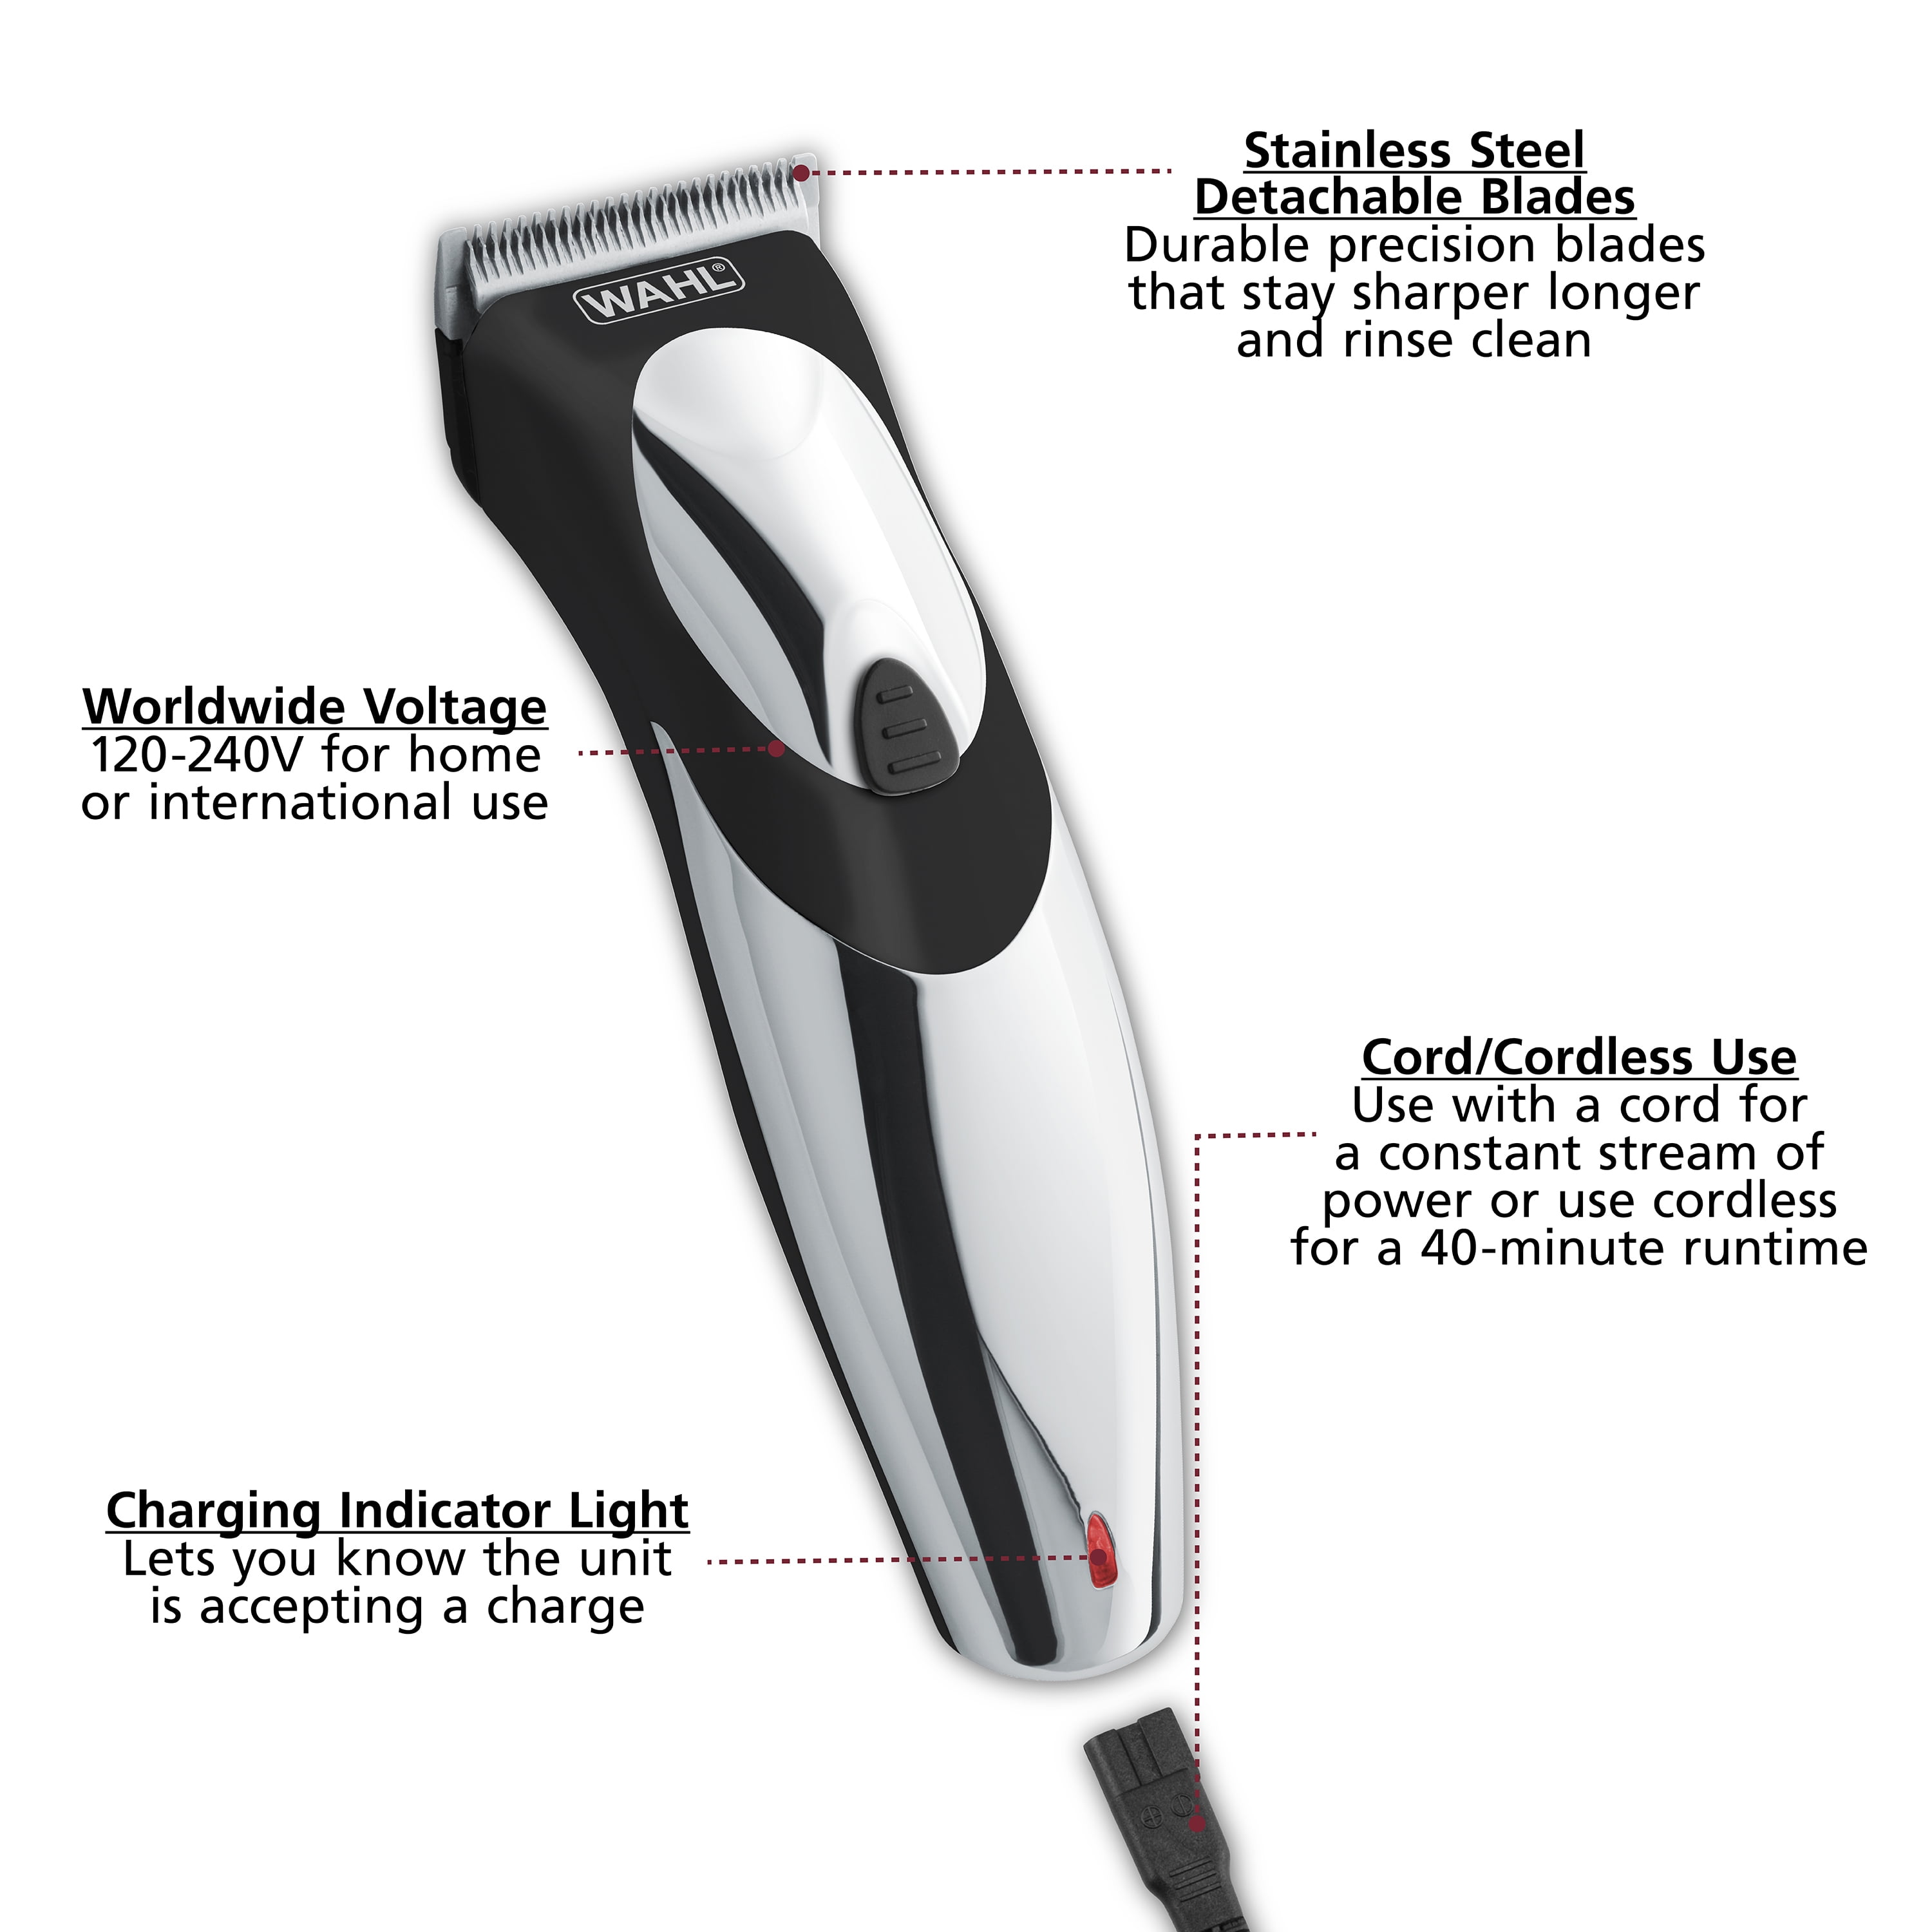 Wahl Haircut Clipper & Beard - Transformer with Voltage Worldwide / - Cord 9639-700 Model Cordless